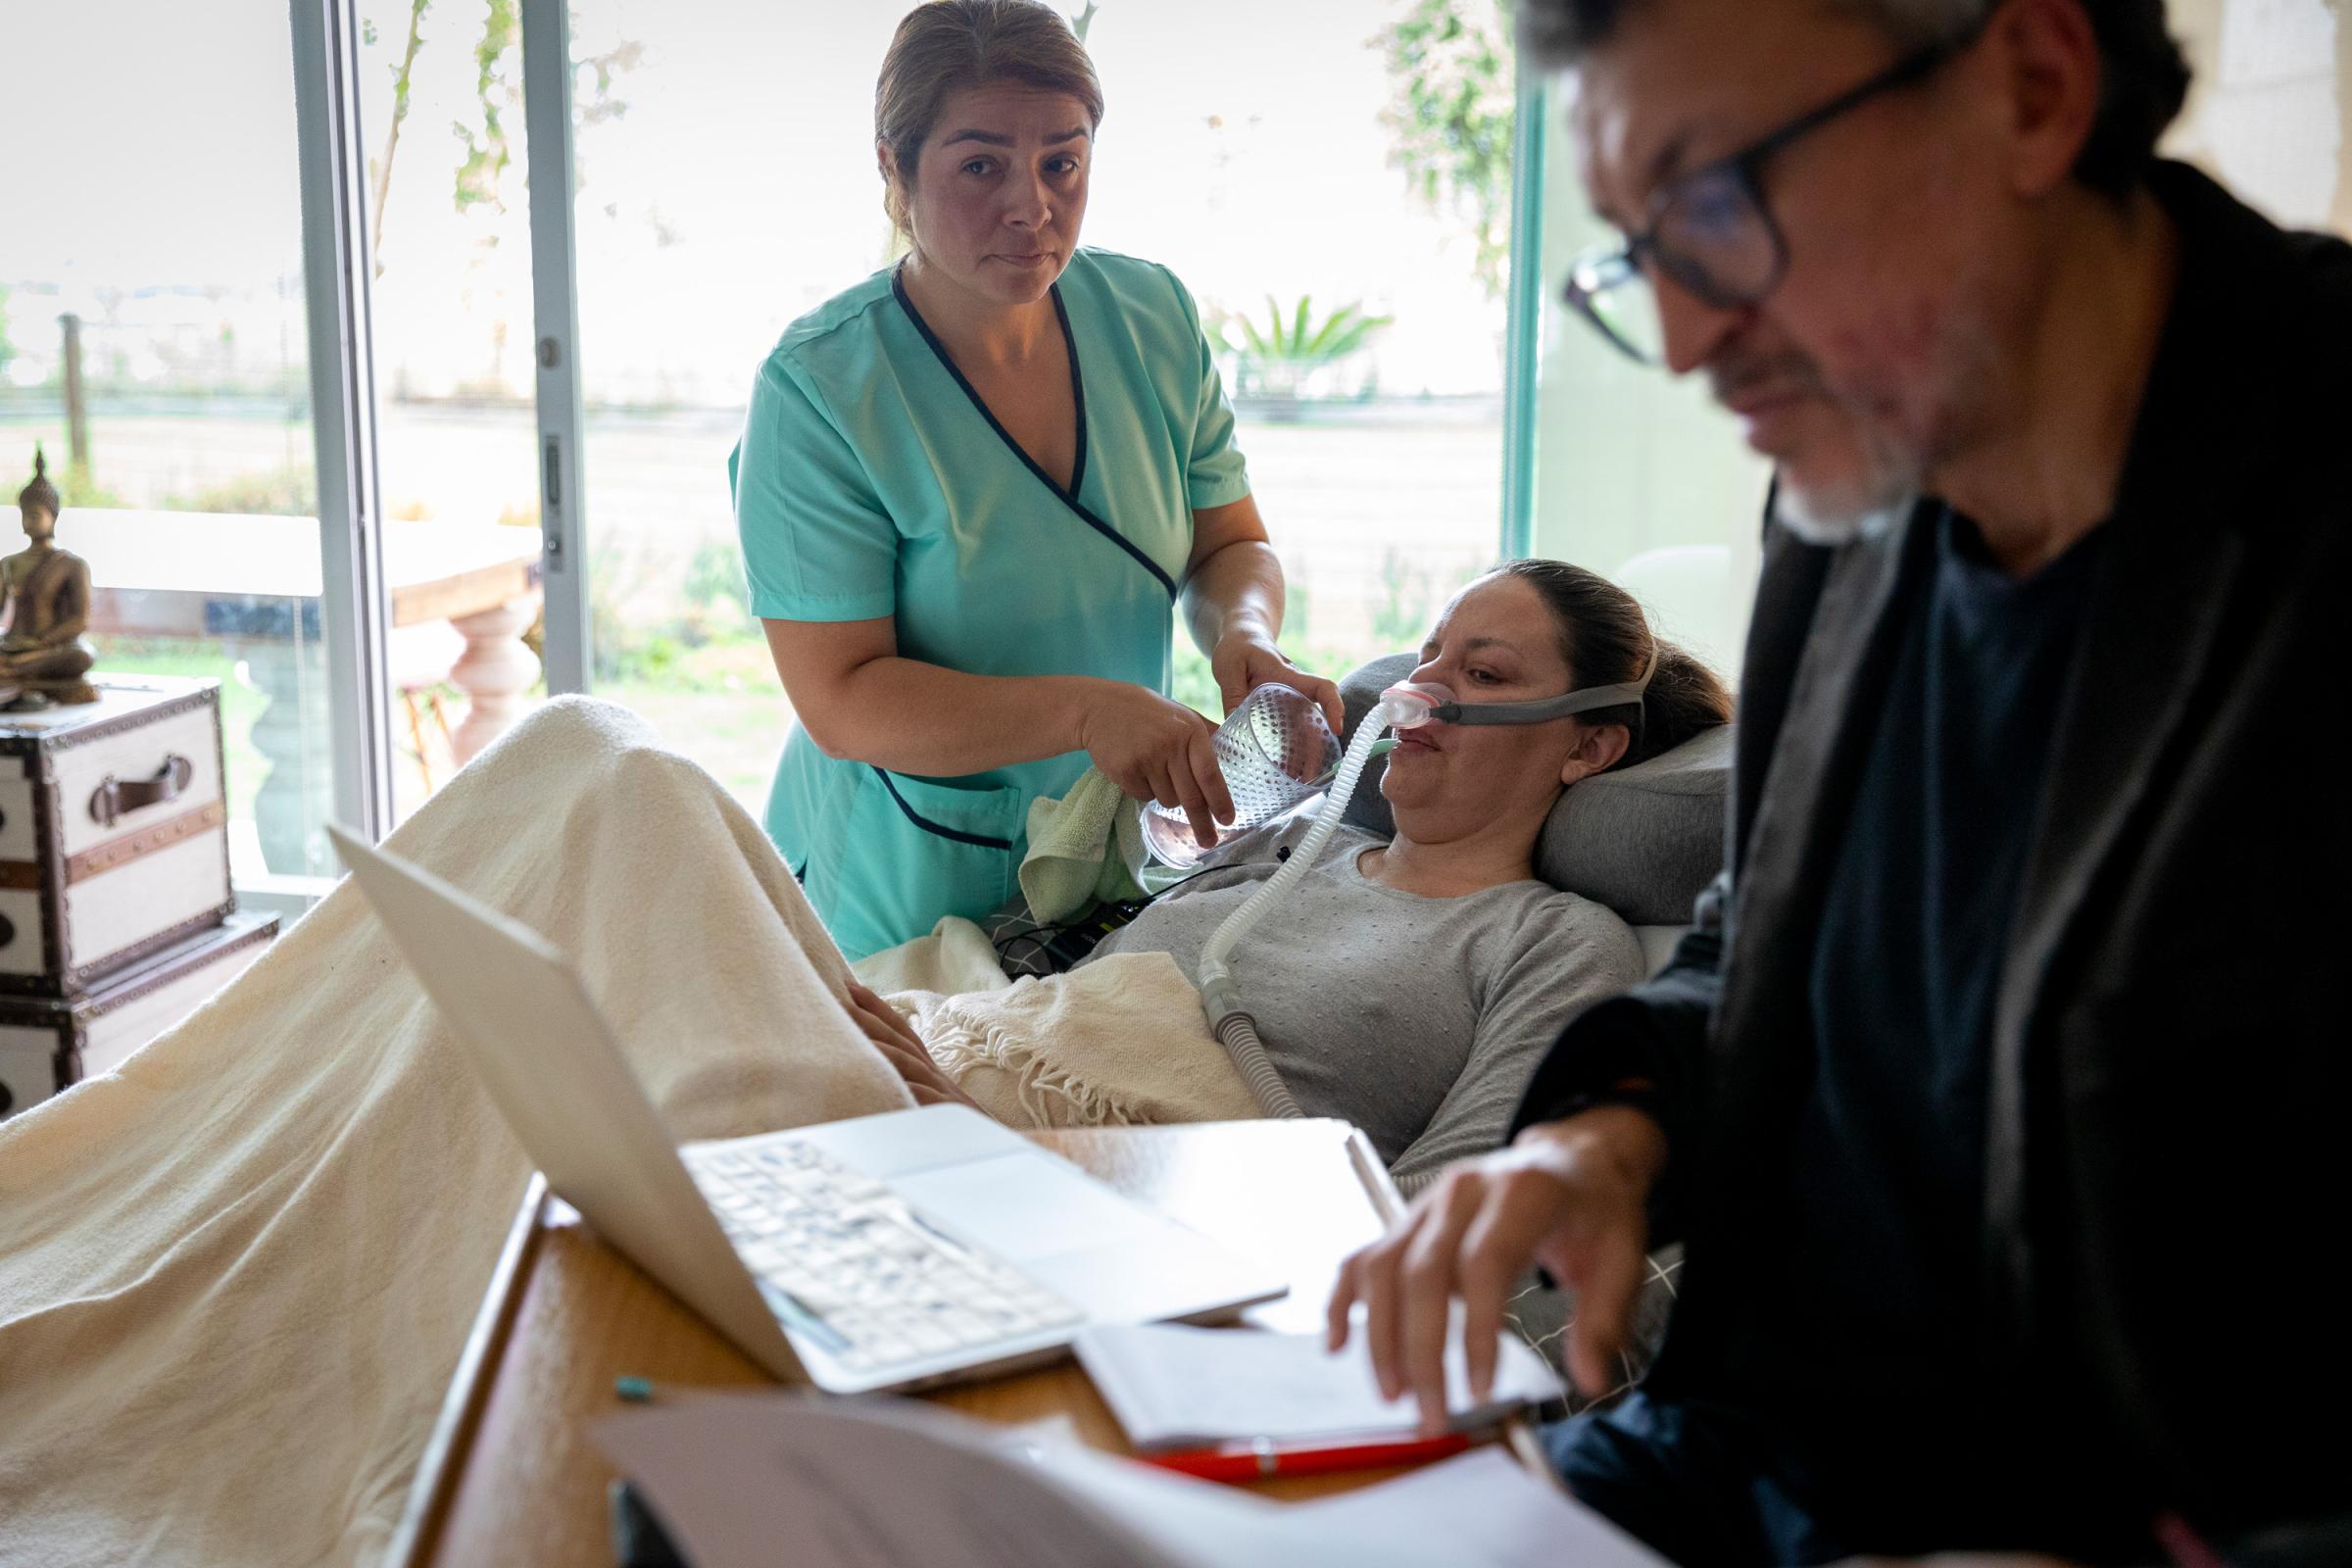 EL PAÍS: Ecuador legalizes euthanasia thanks to Paola Roldan's fight - A nurse attends to Paola Rold&aacute;n during the public hearing where arguments will be...